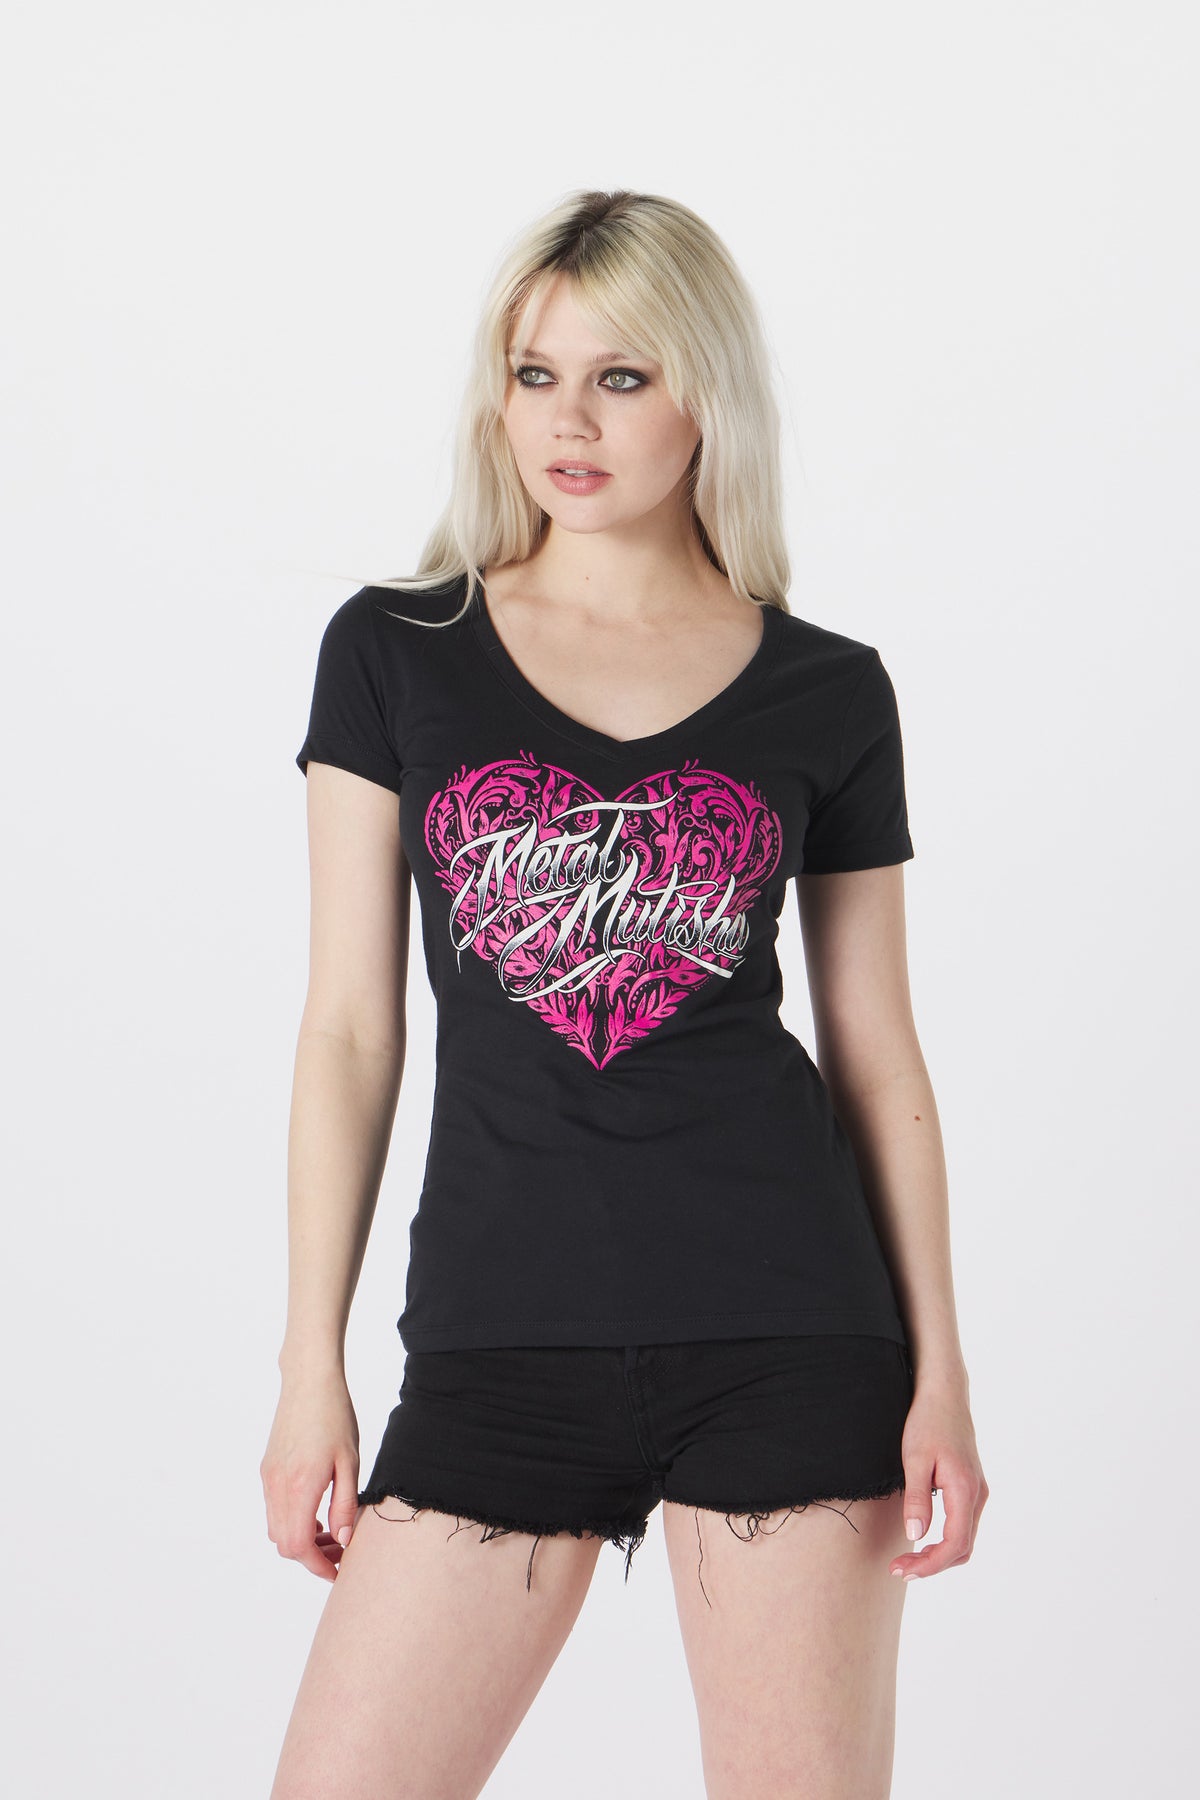 HEARTCORE V-NECK SLIM FIT TEE